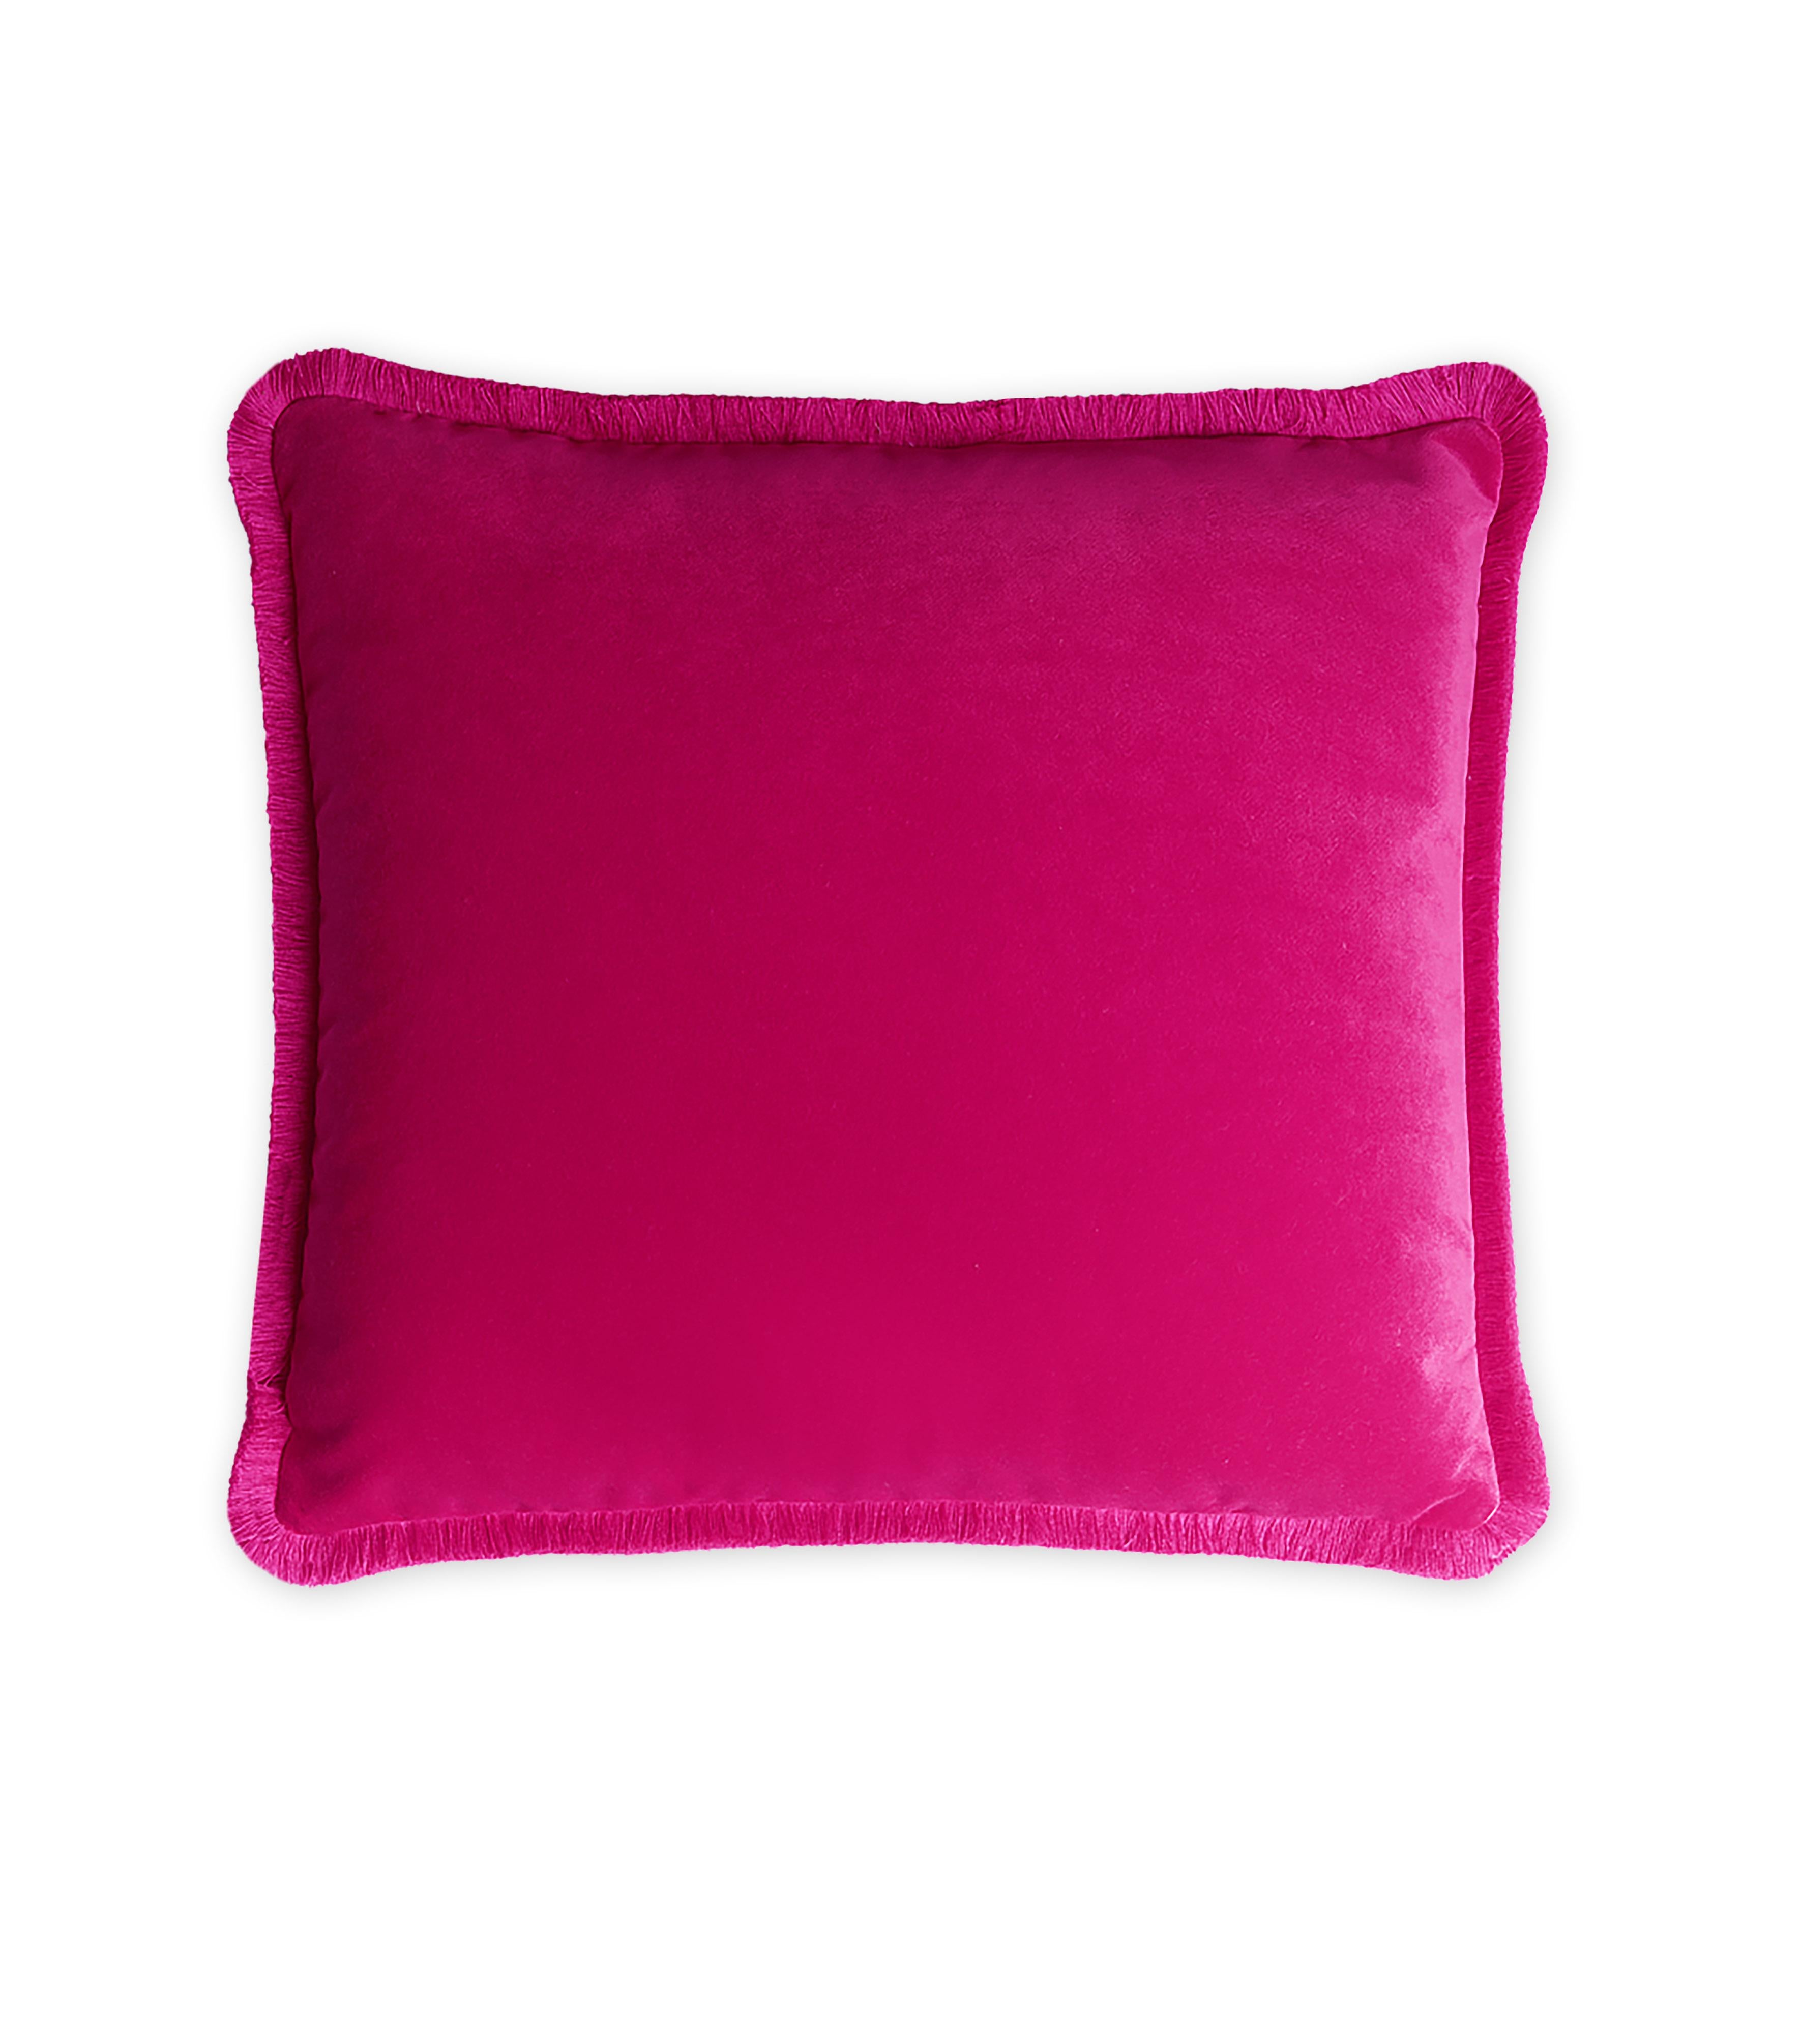 Tailored quality meets stylish allure in this stunning cushion, ideal to increase the comfort of a bed or sofa while not renouncing glamour. The rich inner padding is enveloped in prized velvet, offered in a vibrant combination of solid fuchsia